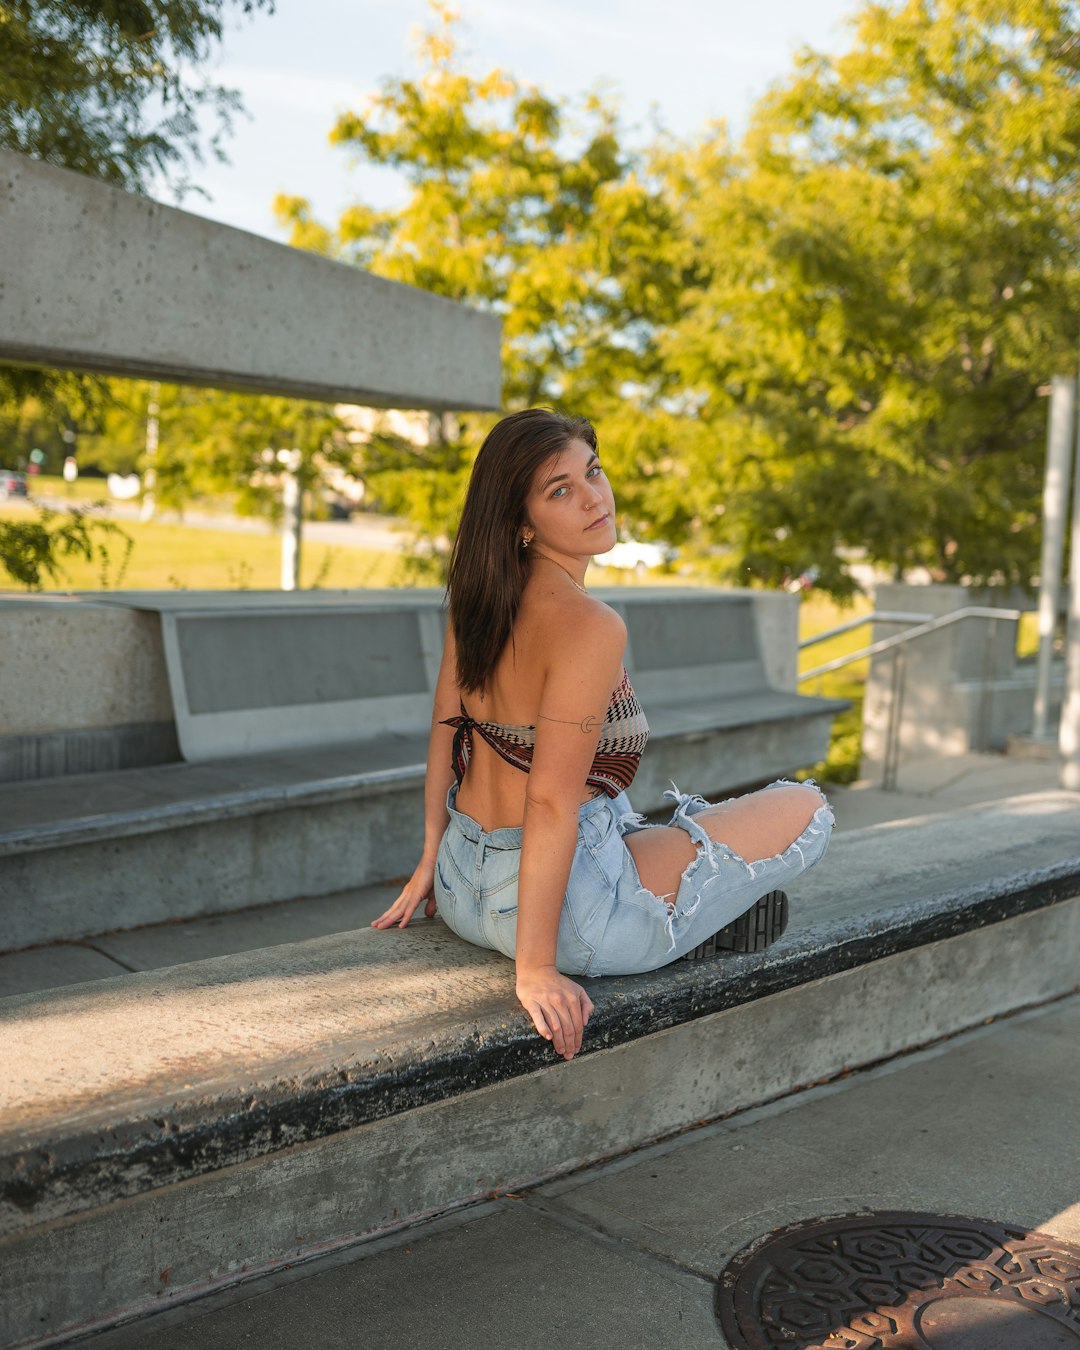 woman in white and black bikini sitting on concrete bench during daytime